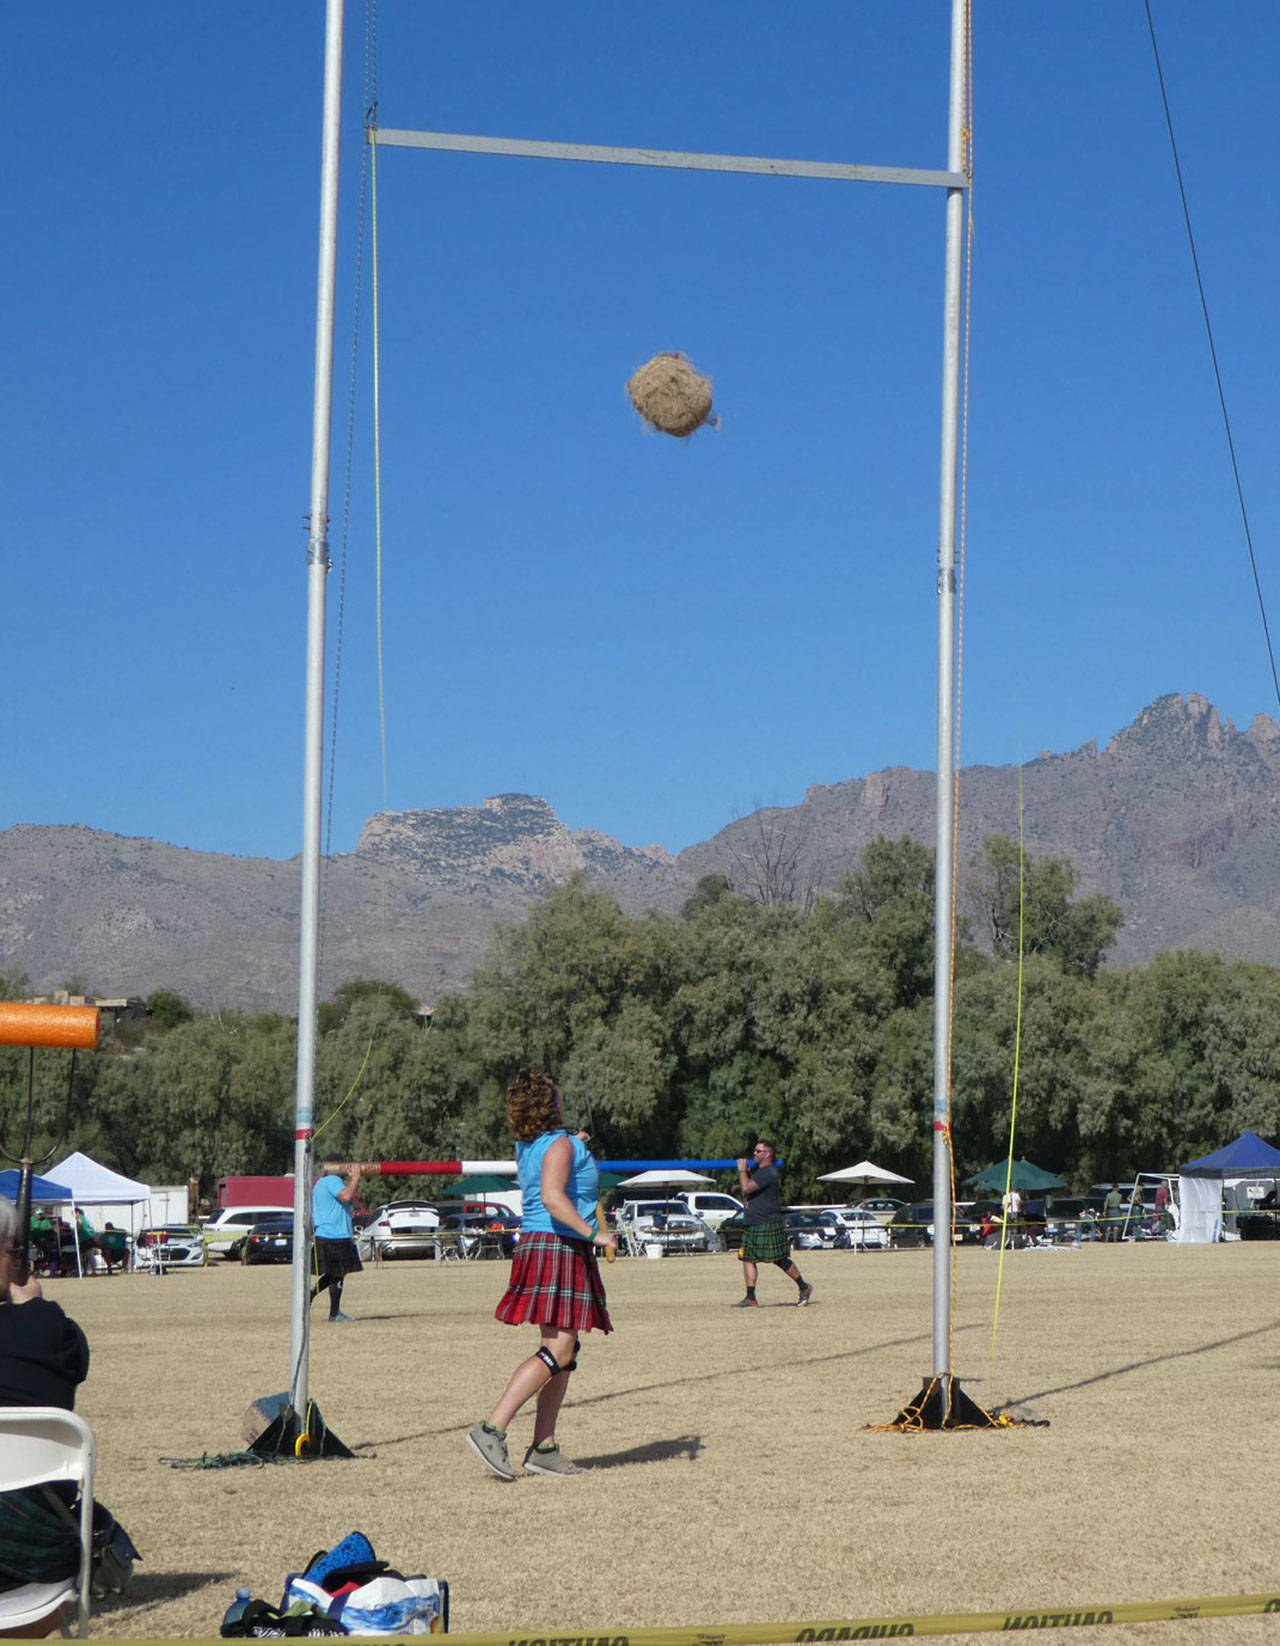 Tishia Malone tries to throw a bag of rope over a bar in the Highland games. (Provided photo)